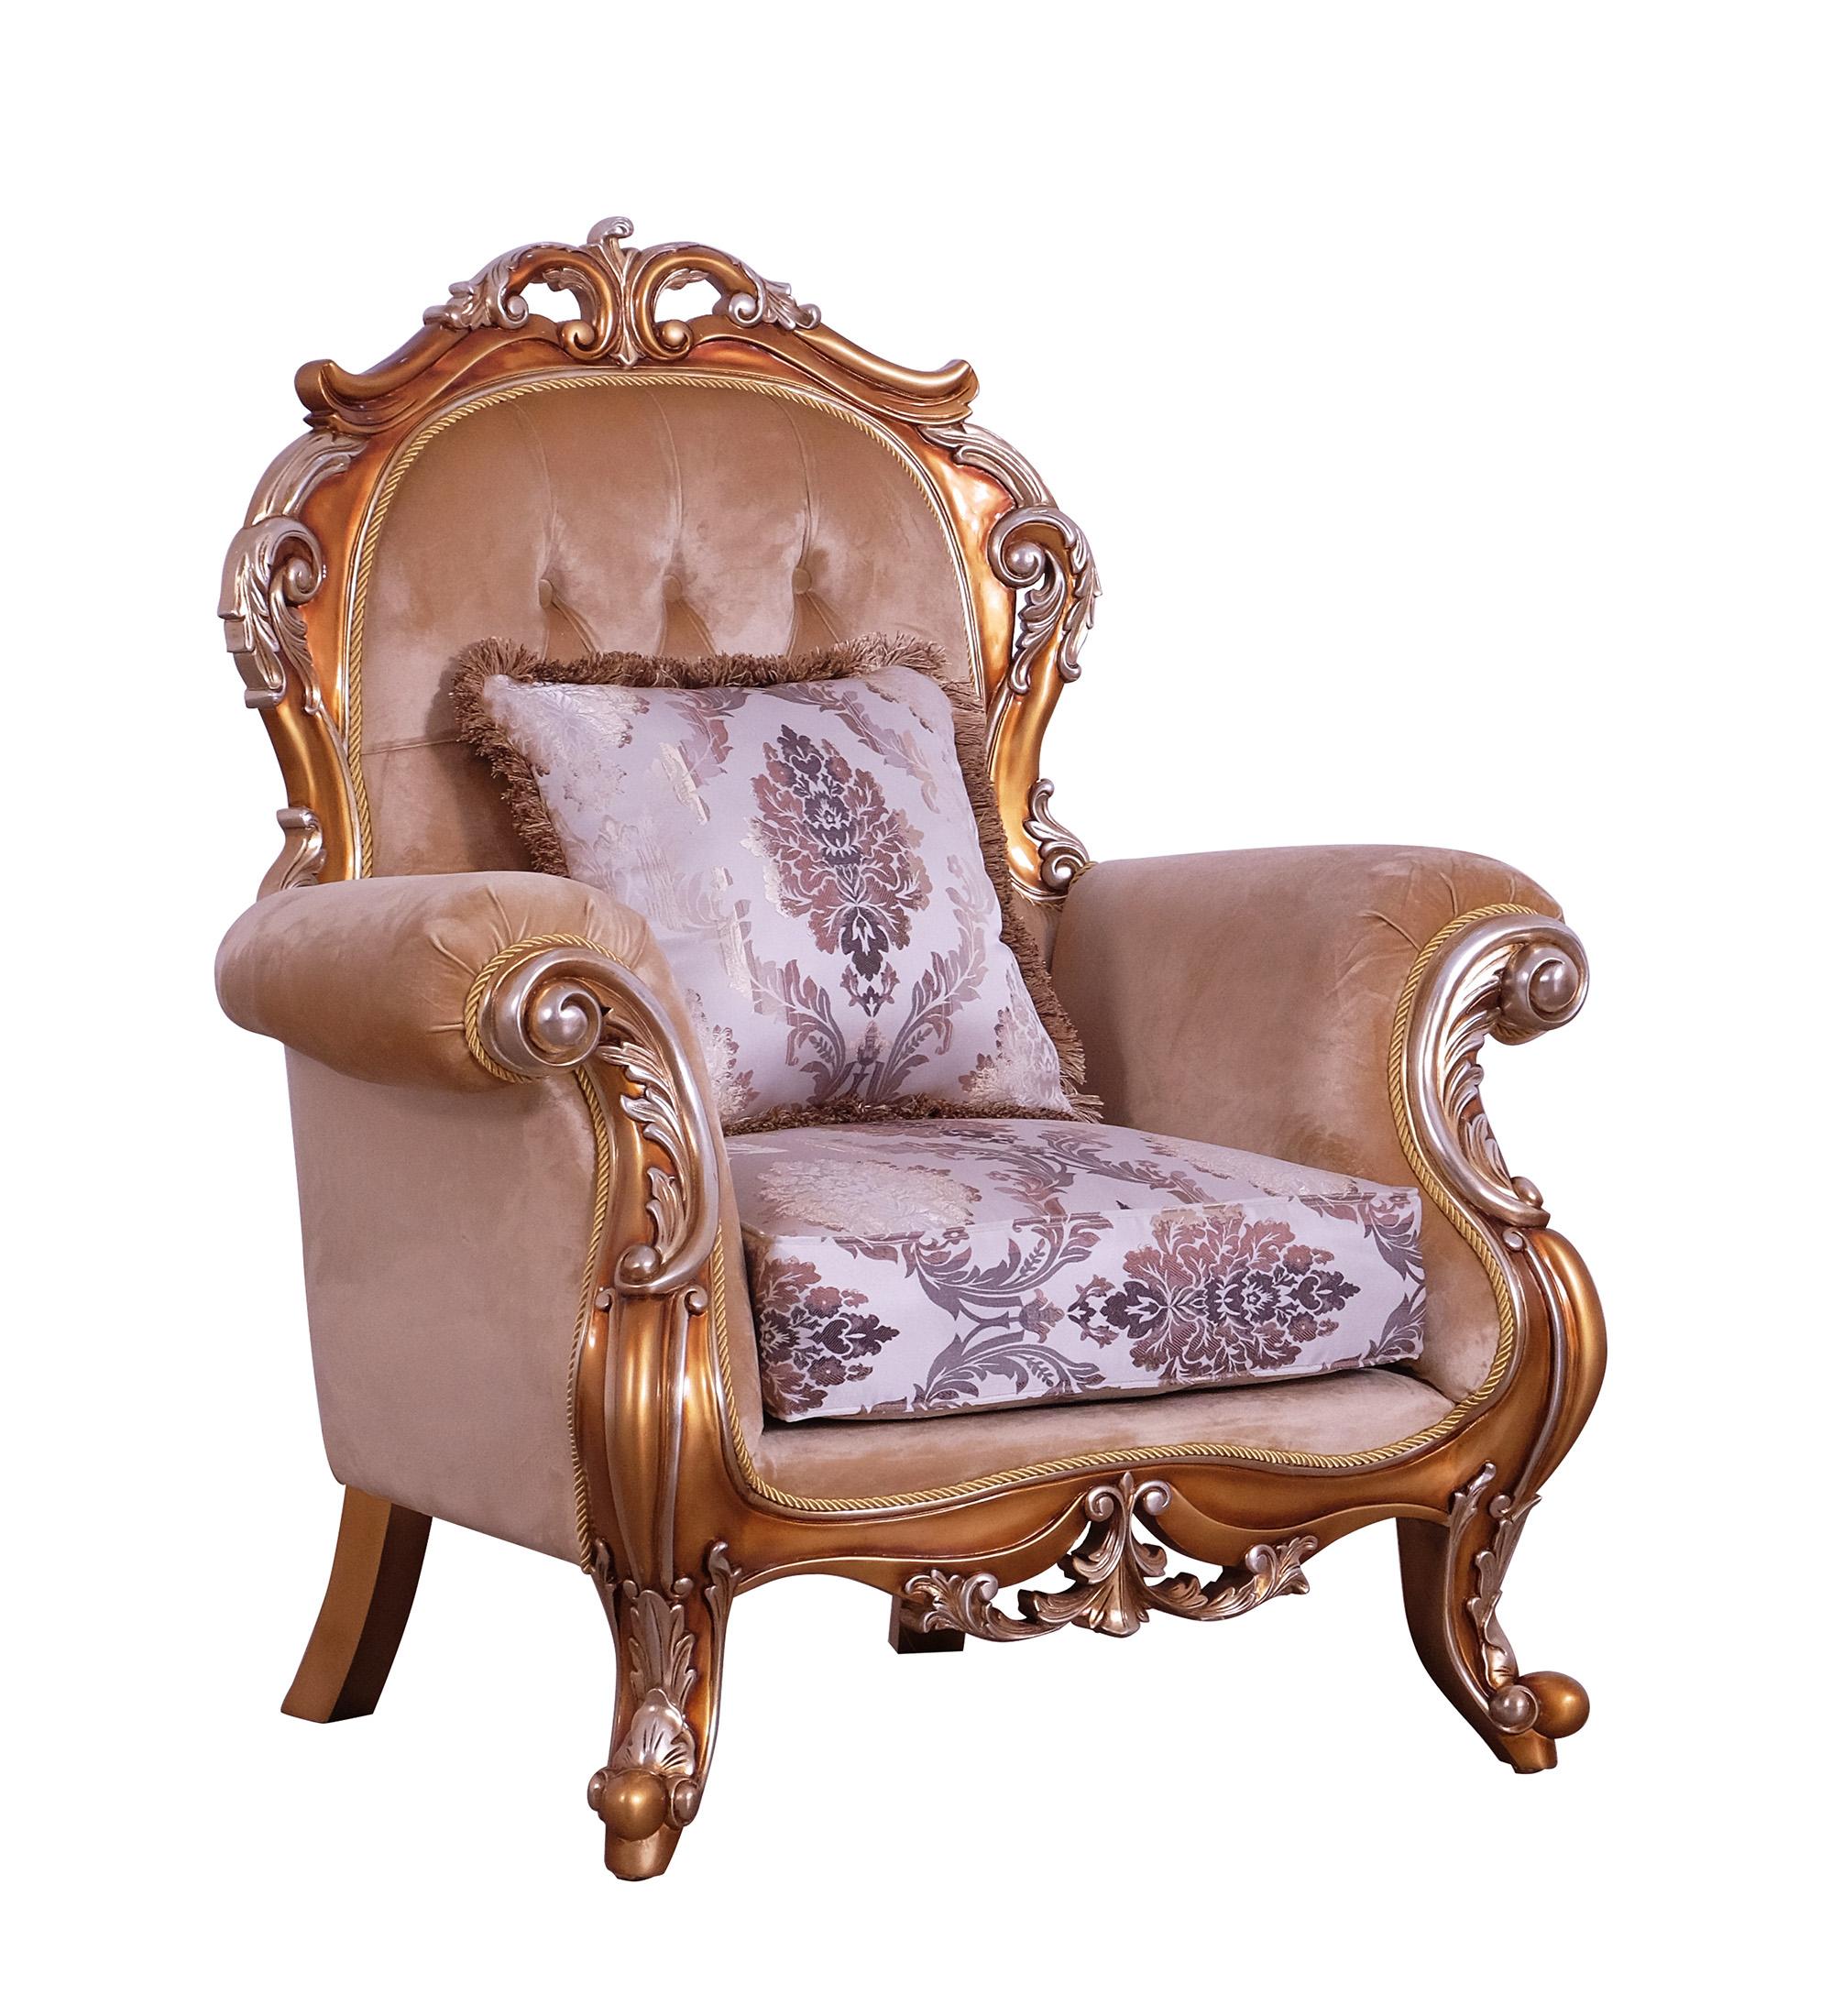 Classic, Traditional Arm Chair TIZIANO II 38996-C in Antique, Silver, Gold, Black Fabric